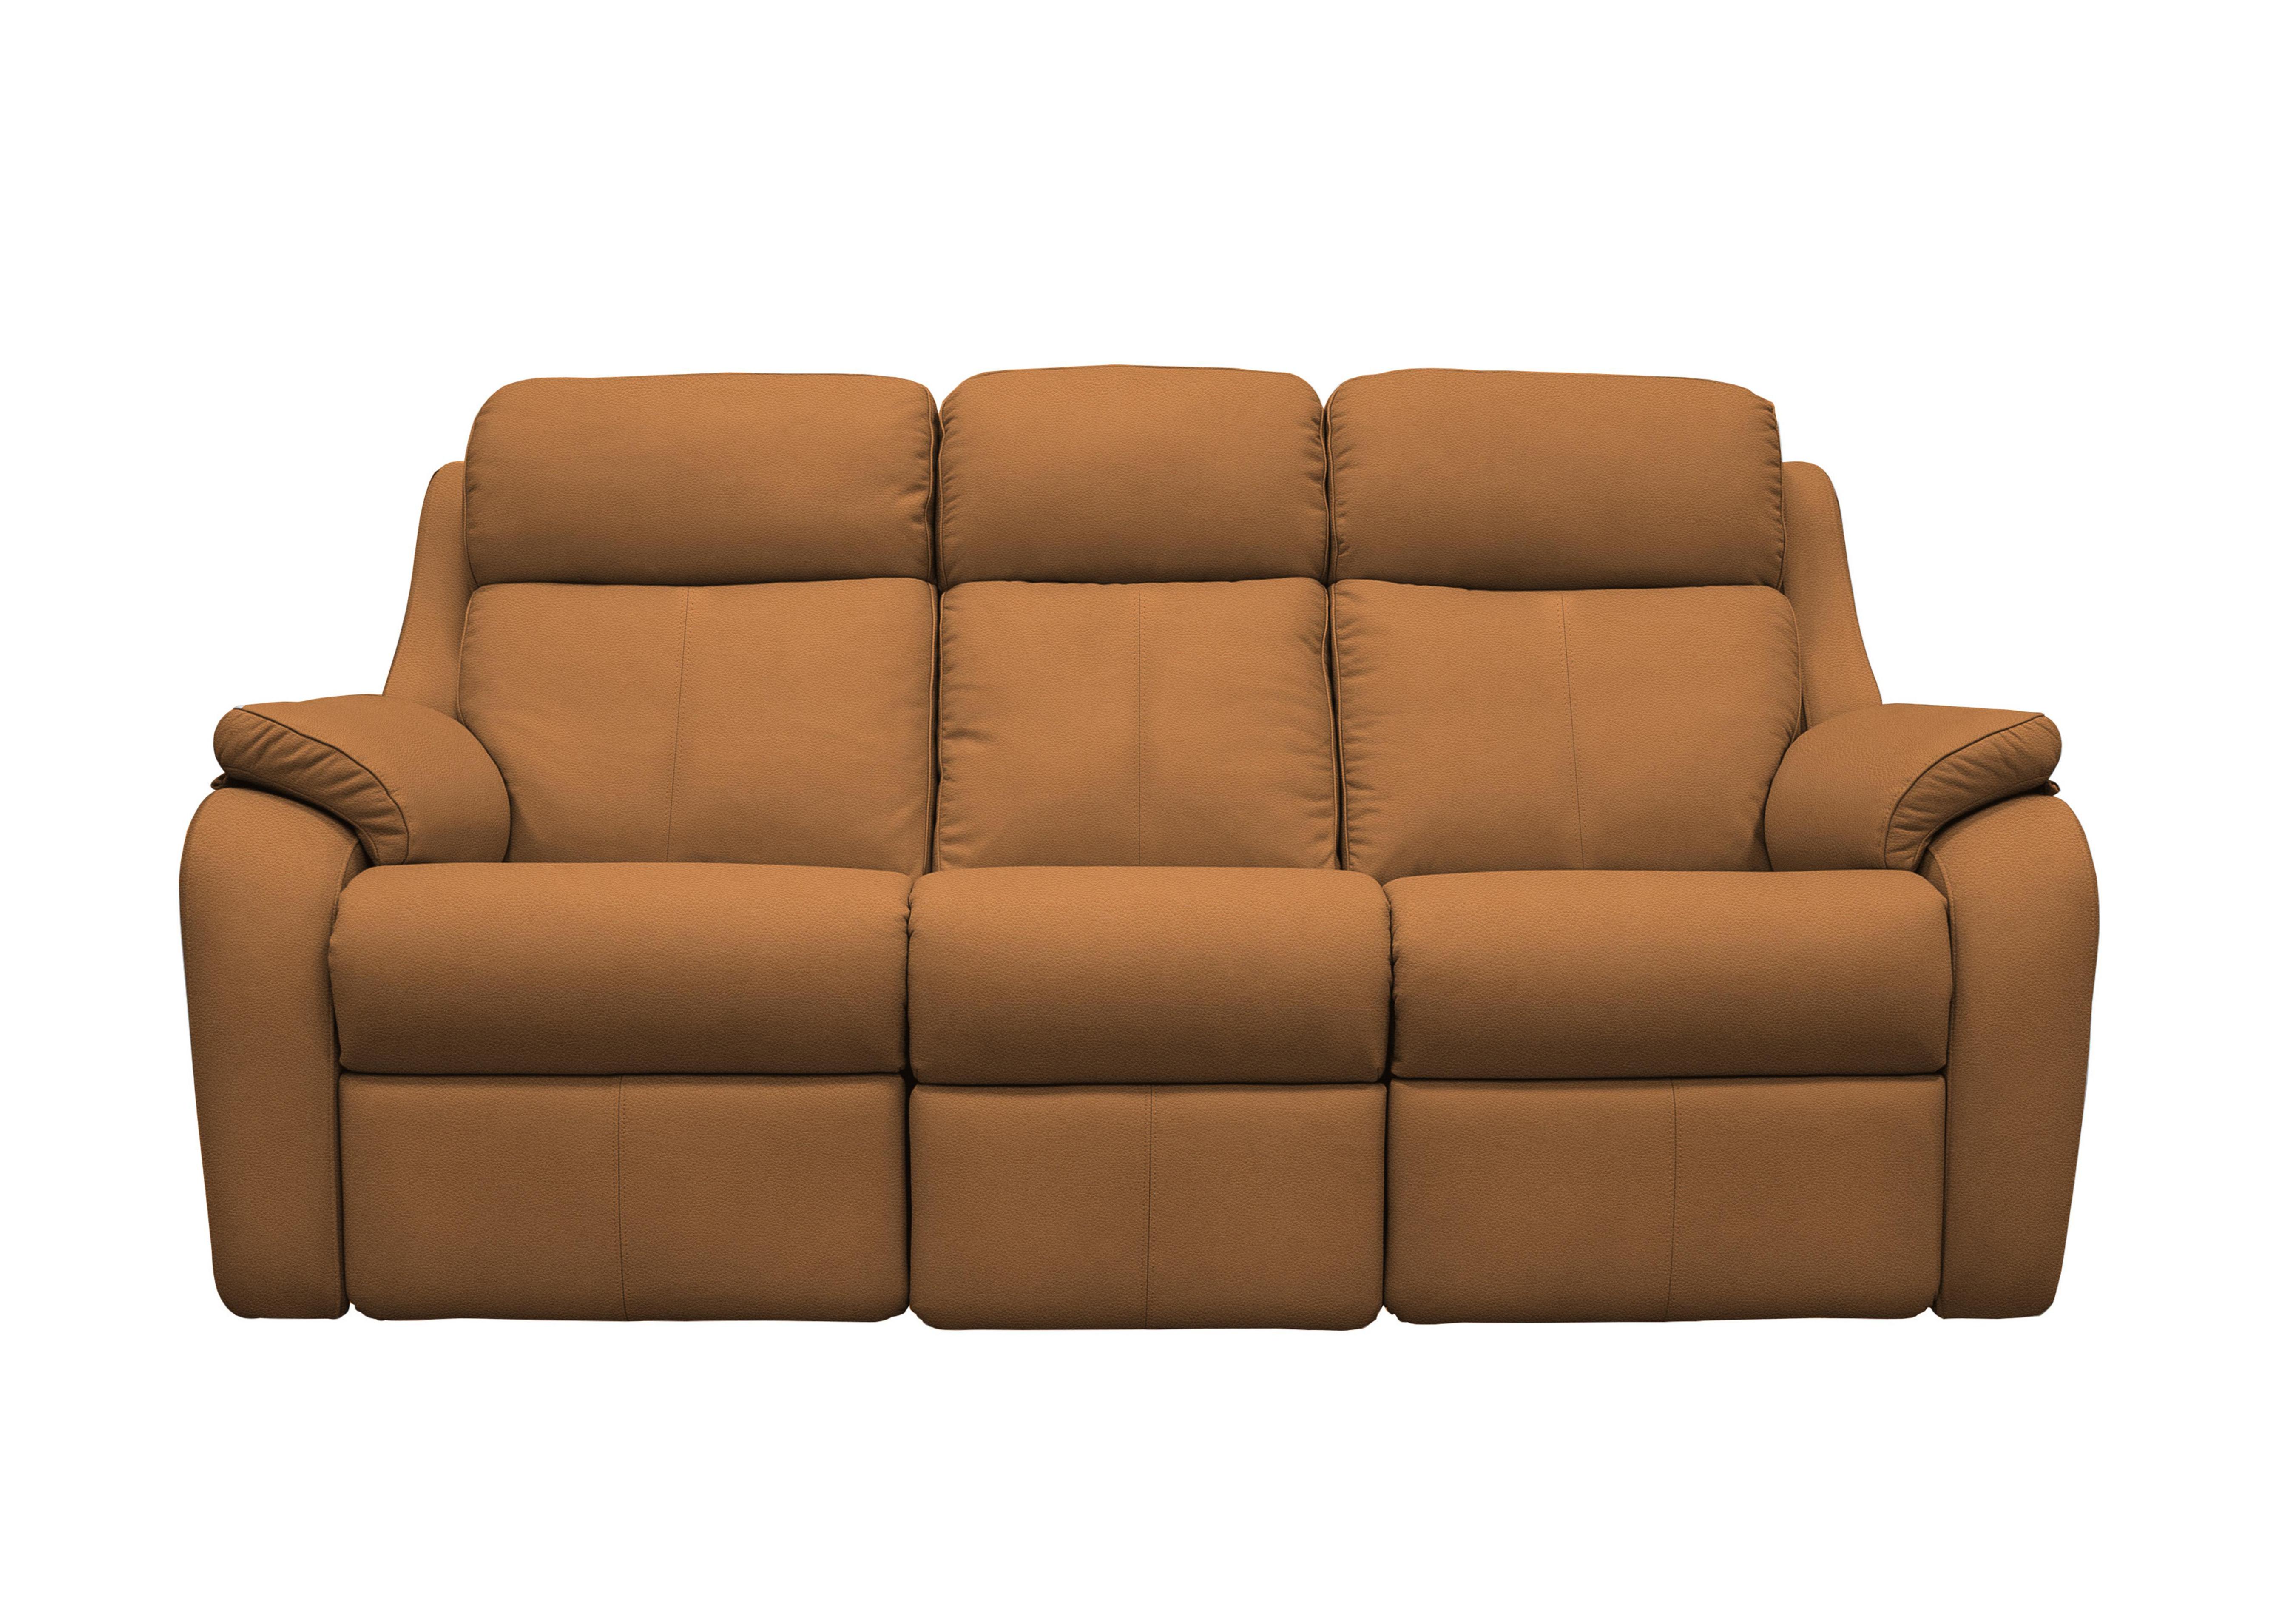 Kingsbury 3 Seater Leather Power Recliner Sofa with Power Headrests in L847 Cambridge Tan on Furniture Village